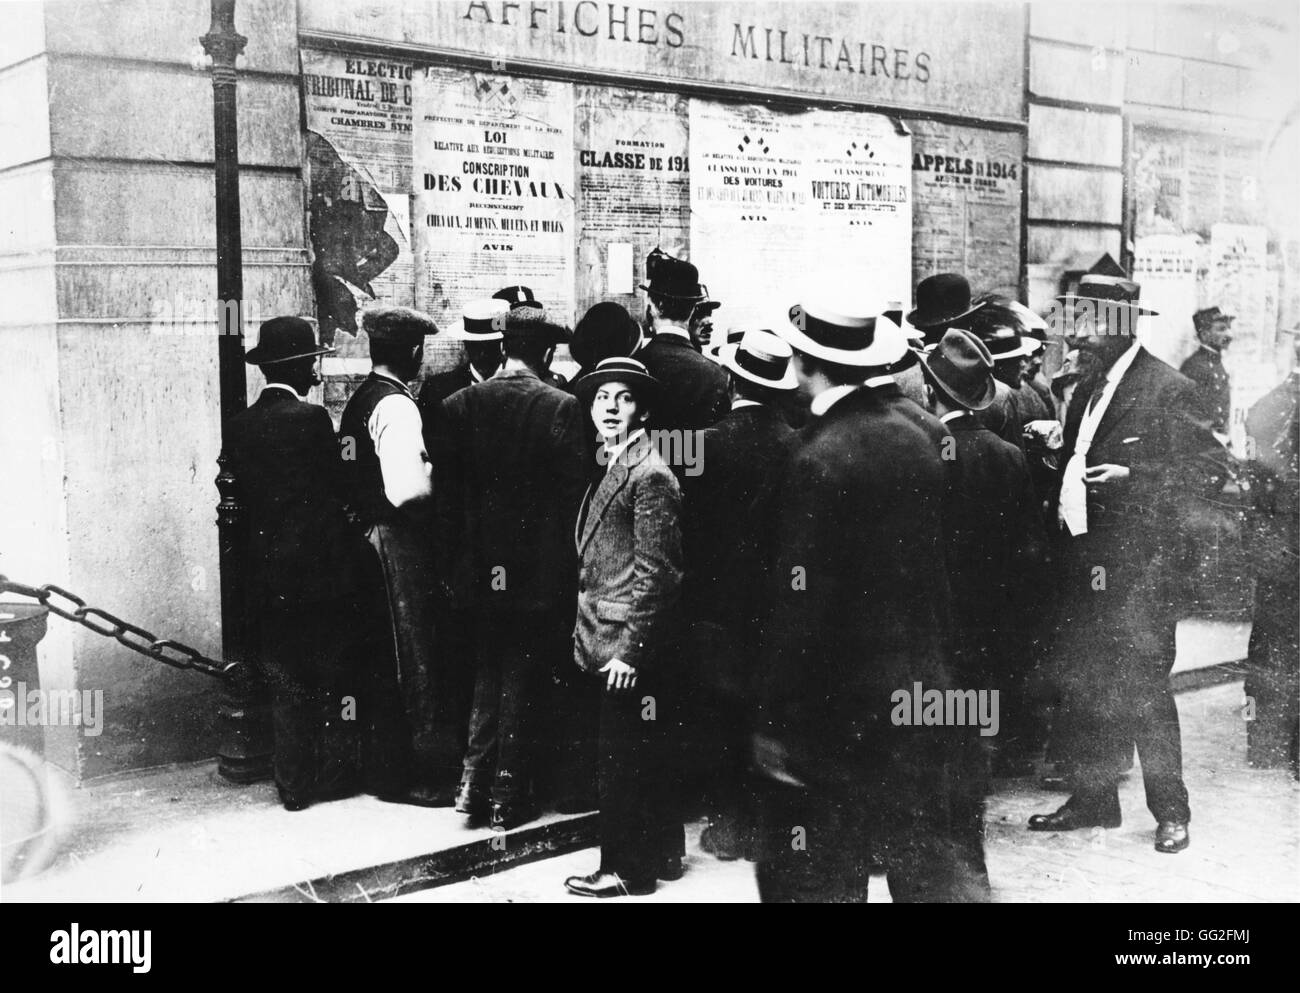 World War One. Paris, August 1914. Announcement of General Mobilization in 1914 Stock Photo